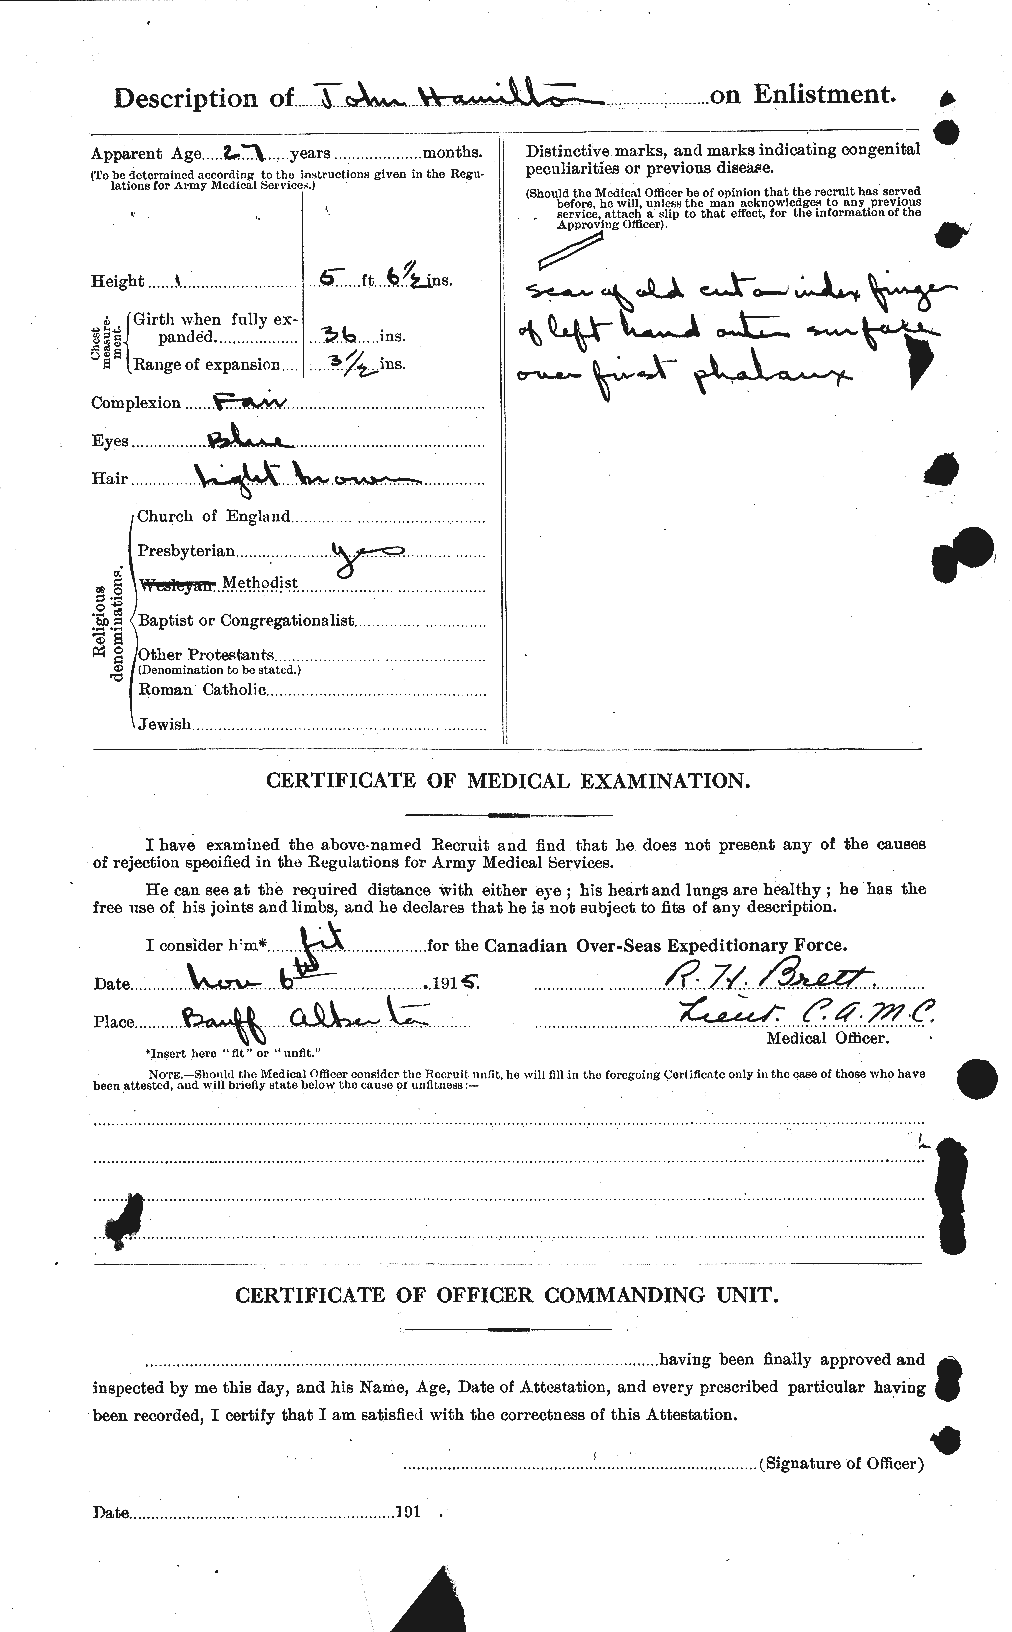 Personnel Records of the First World War - CEF 373022b